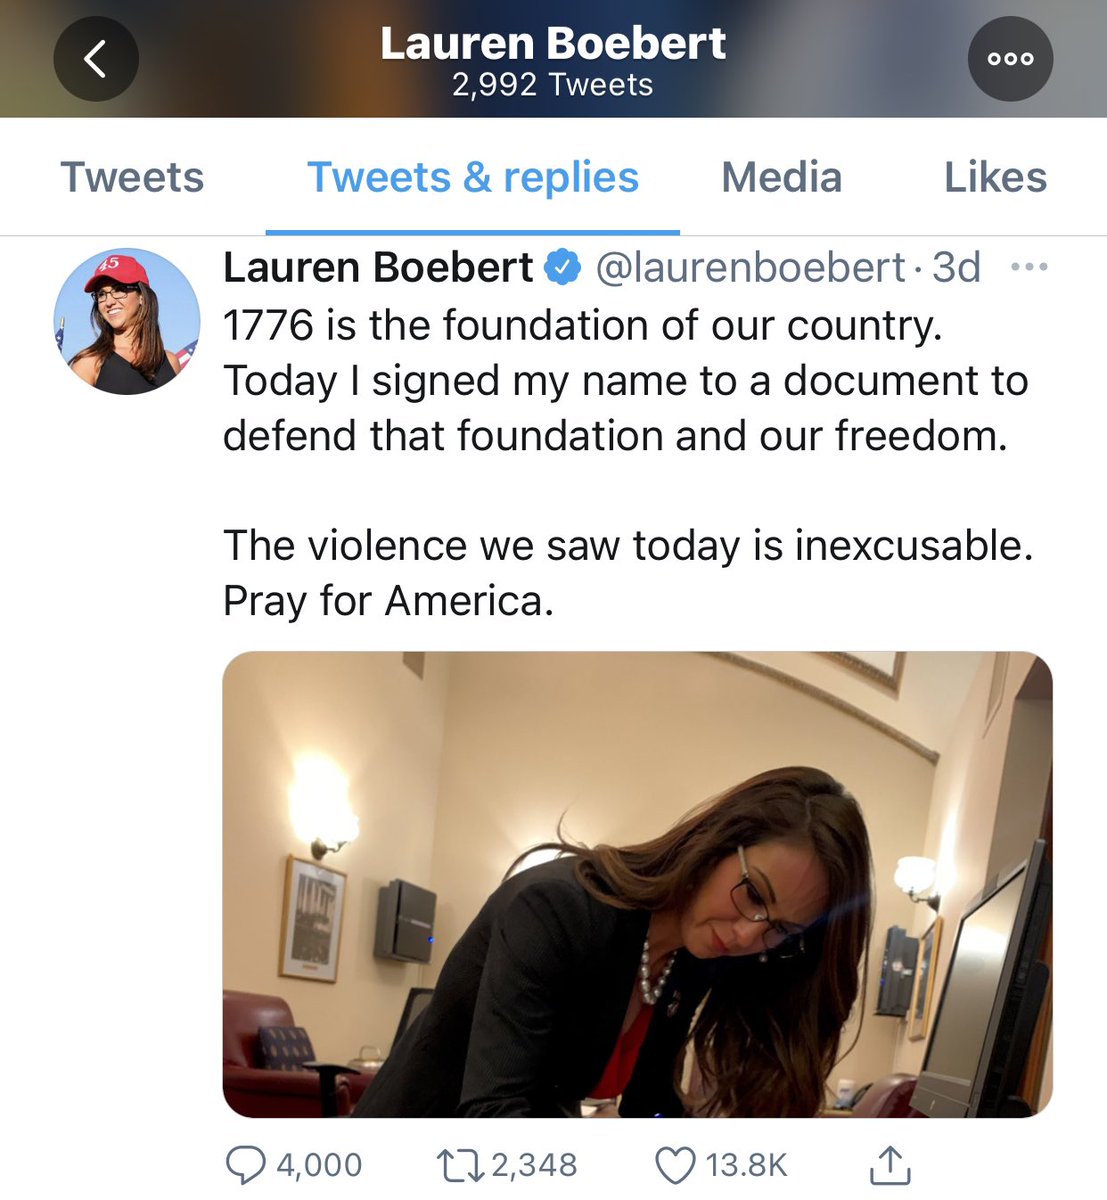 On the day the Trump terrorists entered the Capitol Building,  @laurenboebert tweeted, “today is 1776.” Later, Boebert tried to play “1776” off like it meant something else other than incitement to riot.  #RemoveBoebert  https://twitter.com/laurenboebert/status/1346811381878845442